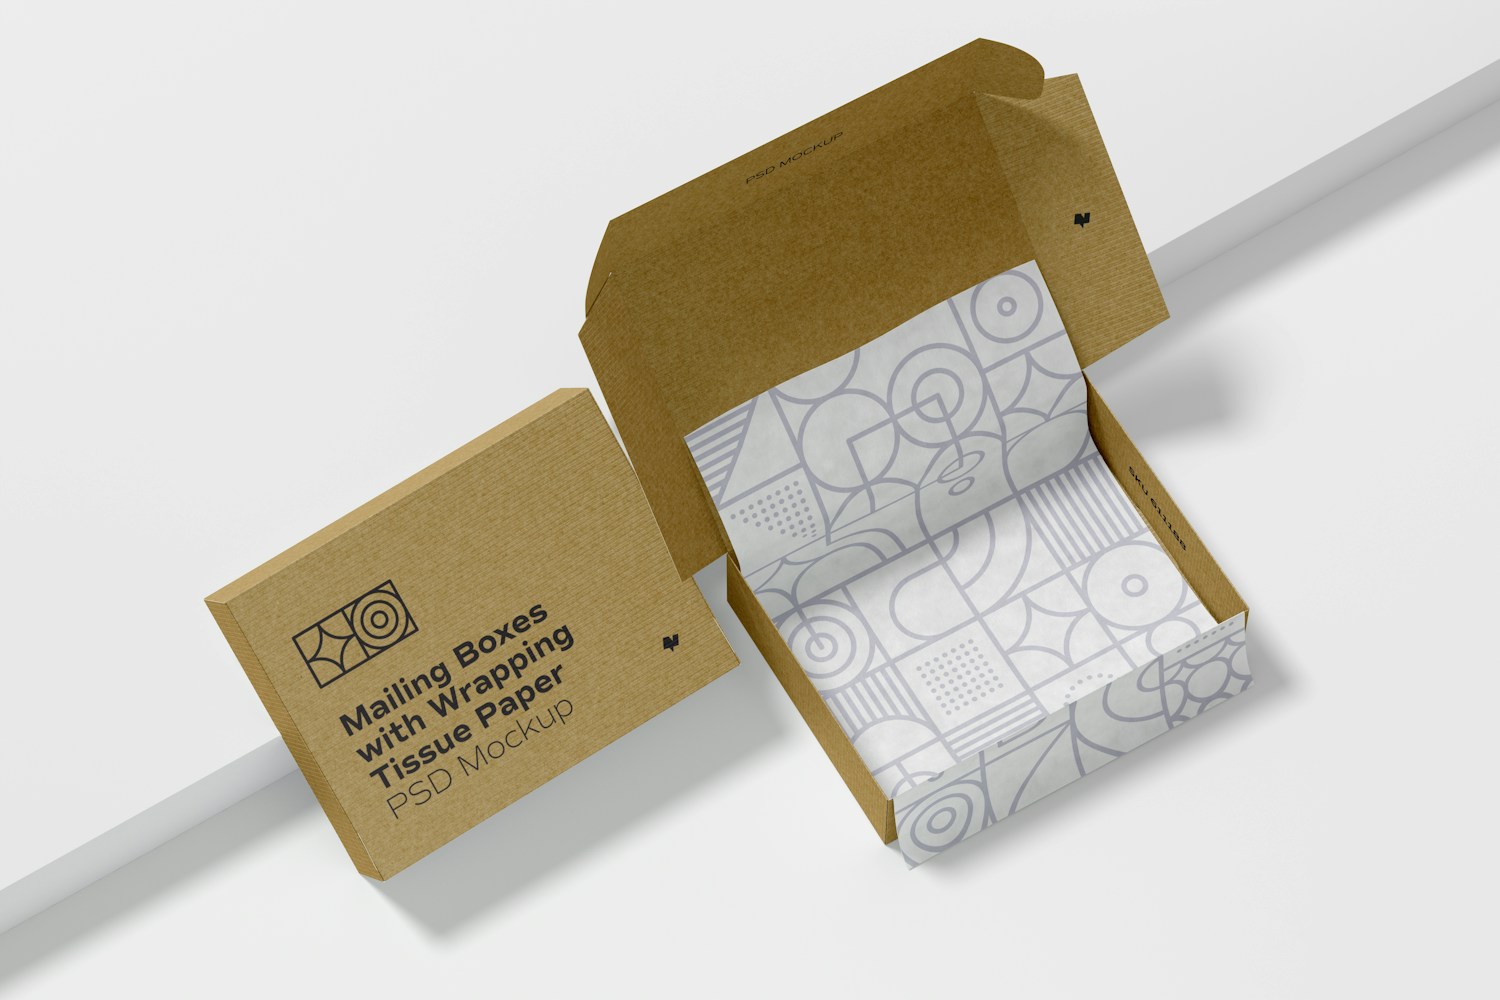 Mailing Boxes with Wrapping Tissue Paper Mockup, Opened and Closed